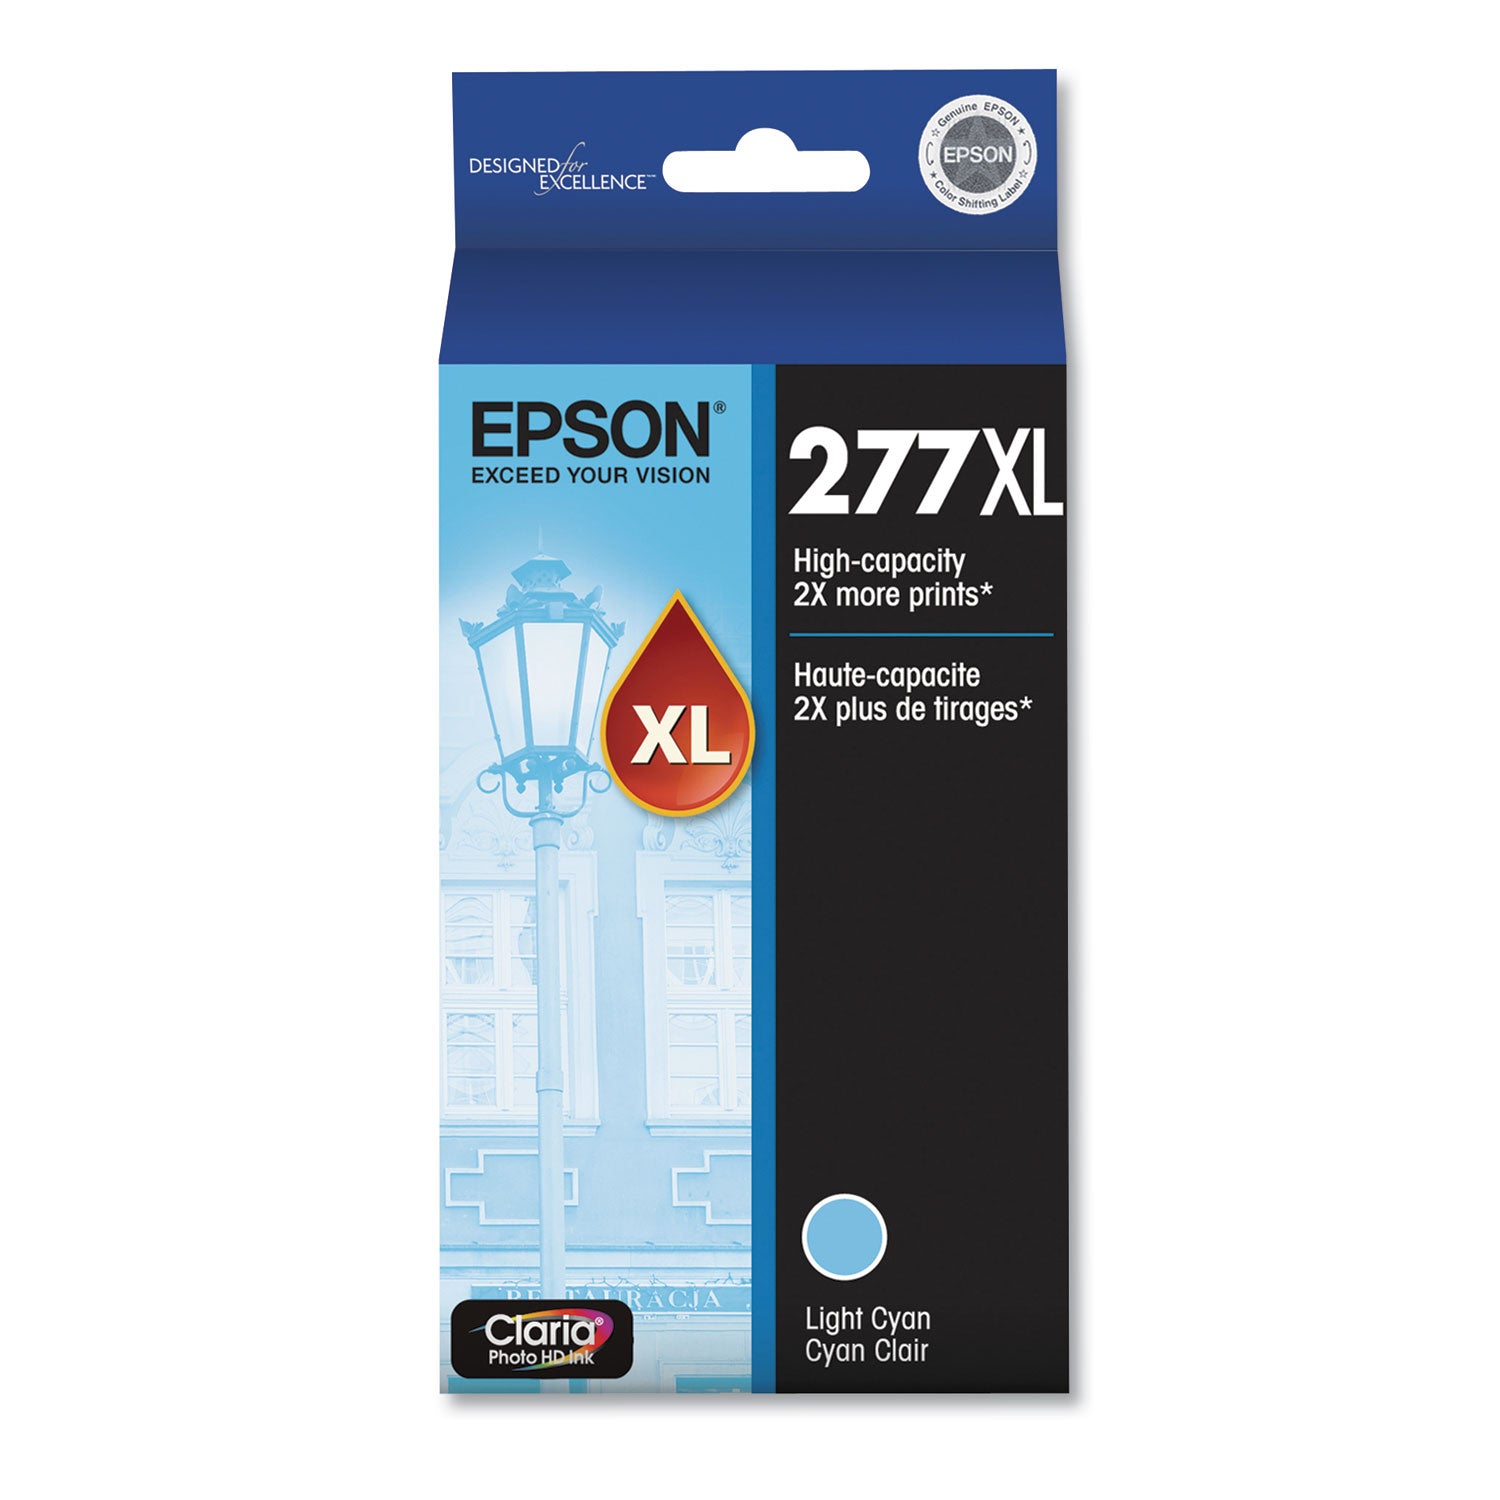 t277xl520-s-277xl-claria-high-yield-ink-740-page-yield-light-cyan_epst277xl520s - 1